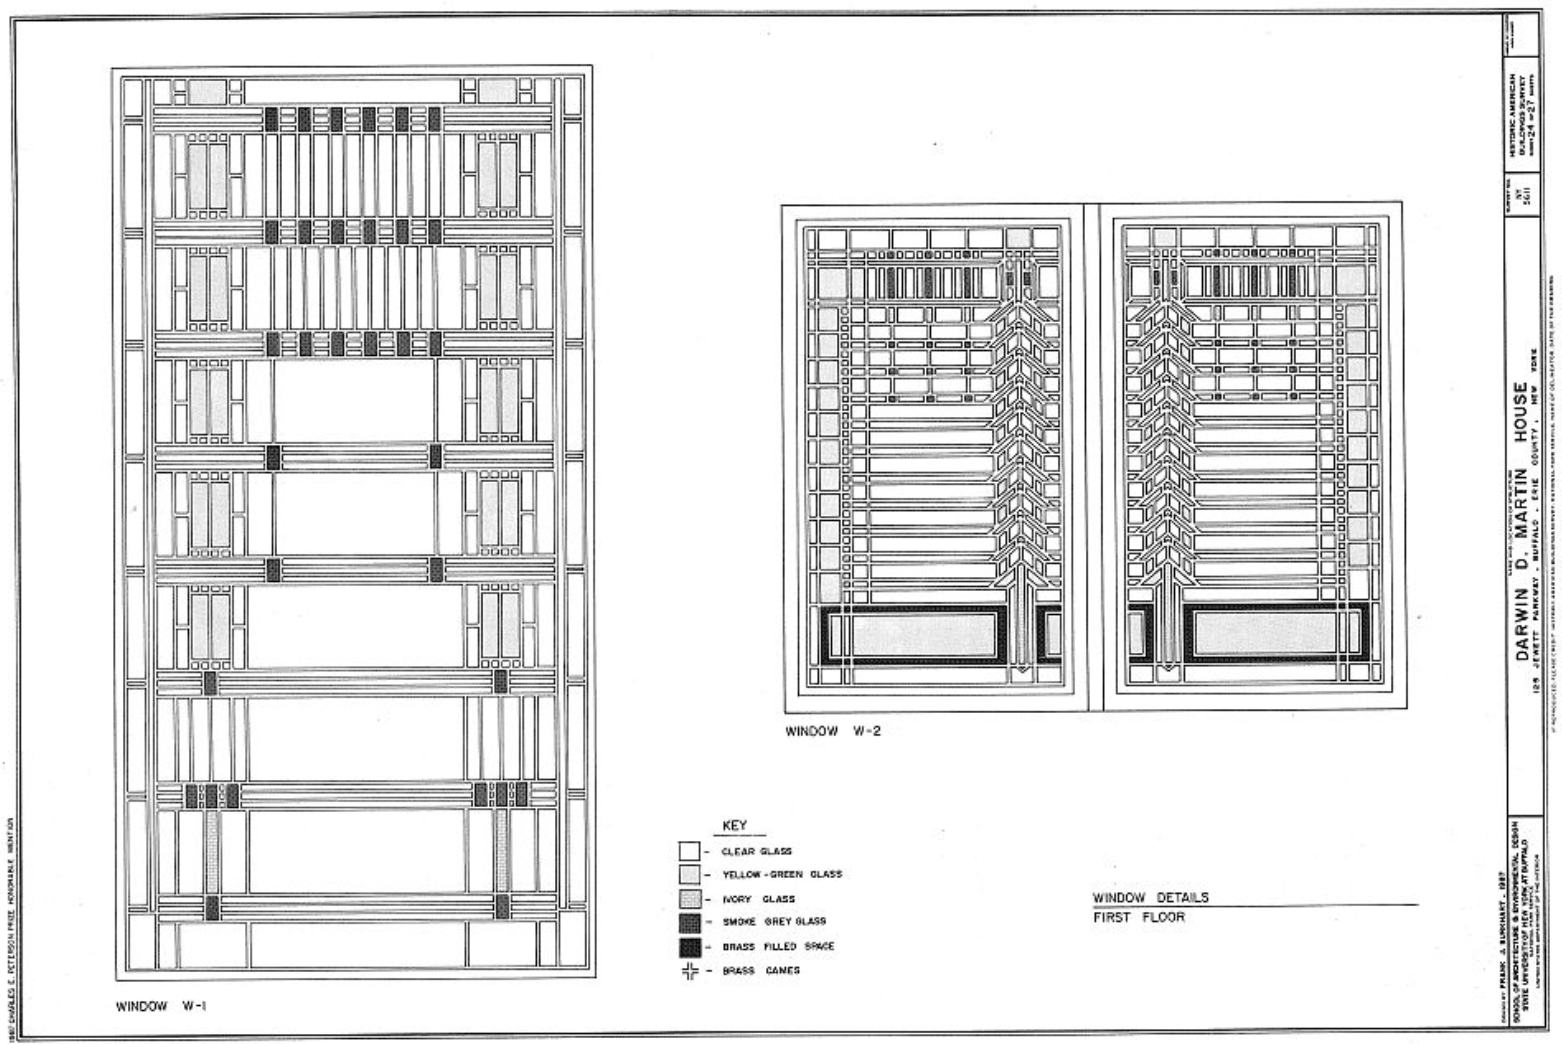 schematic drawing in black and white showing the windows on the main floor of the frank lloyd wright designed Martin House